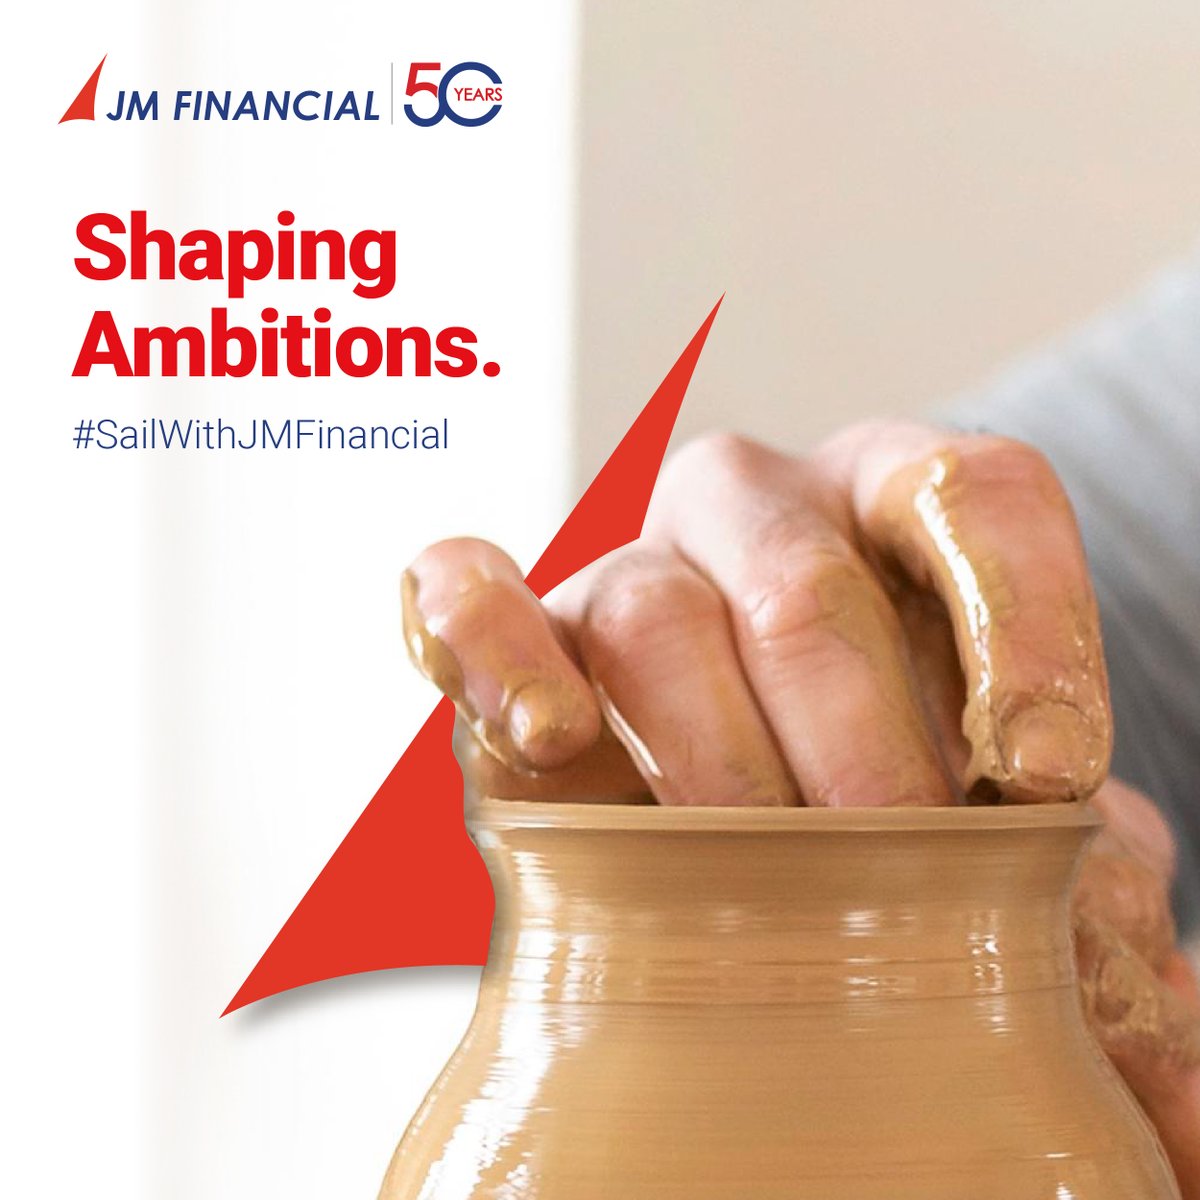 Let your ambitions propel you towards success.

#JMFinancial #50yearsofJMFinancial #SailWithJMFinancial